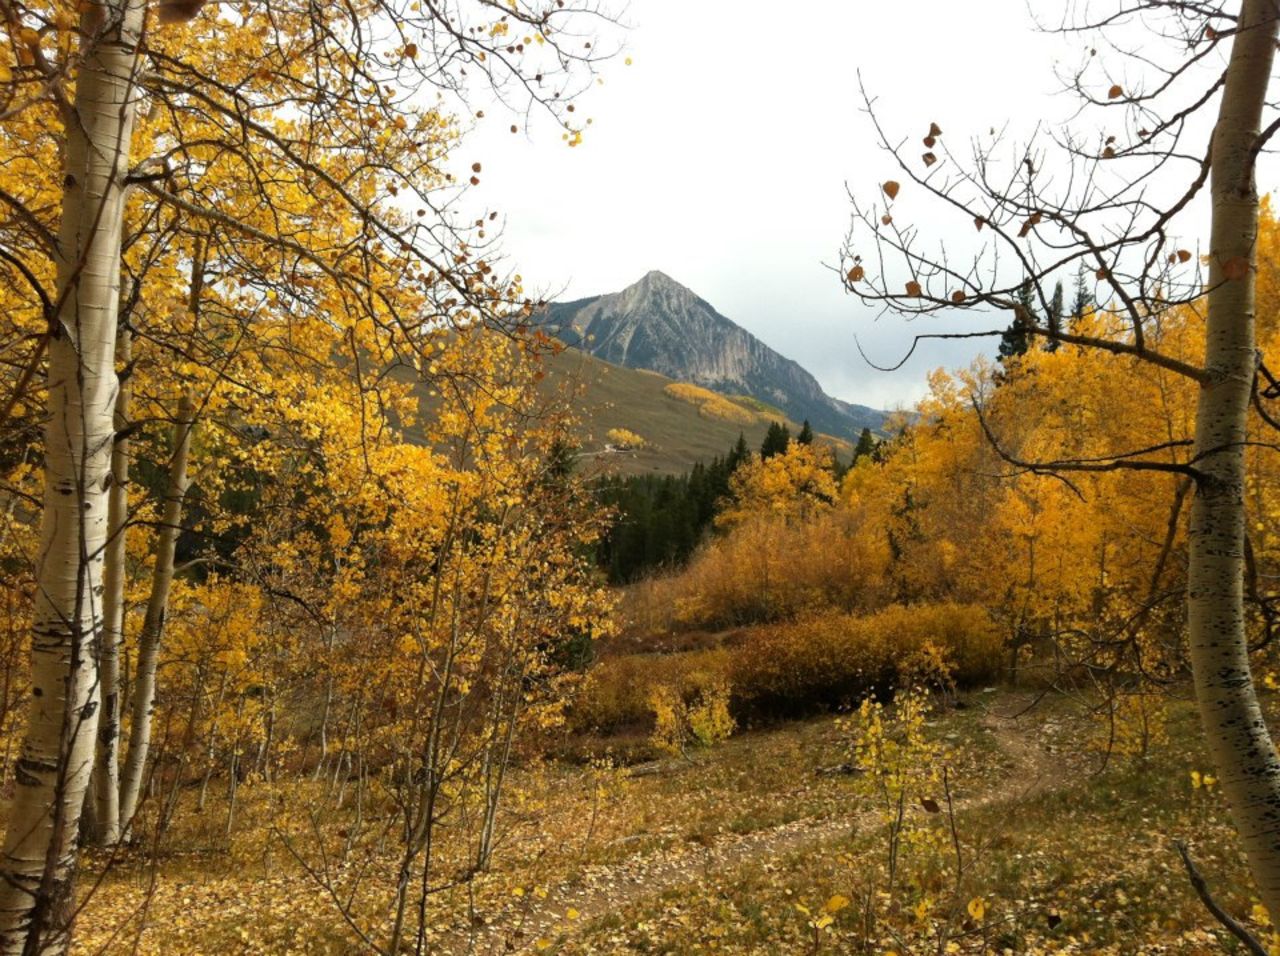 Embrace the great outdoors and push your physical limits along the trails of the Wildflower Capital of the World: <a href="http://www.gunnisoncrestedbutte.com" target="_blank" target="_blank">Crested Butte, Colorado</a>, which is dressed in a blanket of golden aspens each fall. Whether on mountain bike, horseback or on your own two feet, you'll want a camera and plenty of time to soak up the atmosphere. Film buffs can combine adventure with culture September 26-29, at the <a href="http://www.cbfilmfest.org" target="_blank" target="_blank">Crested Butte Film Fest</a>.